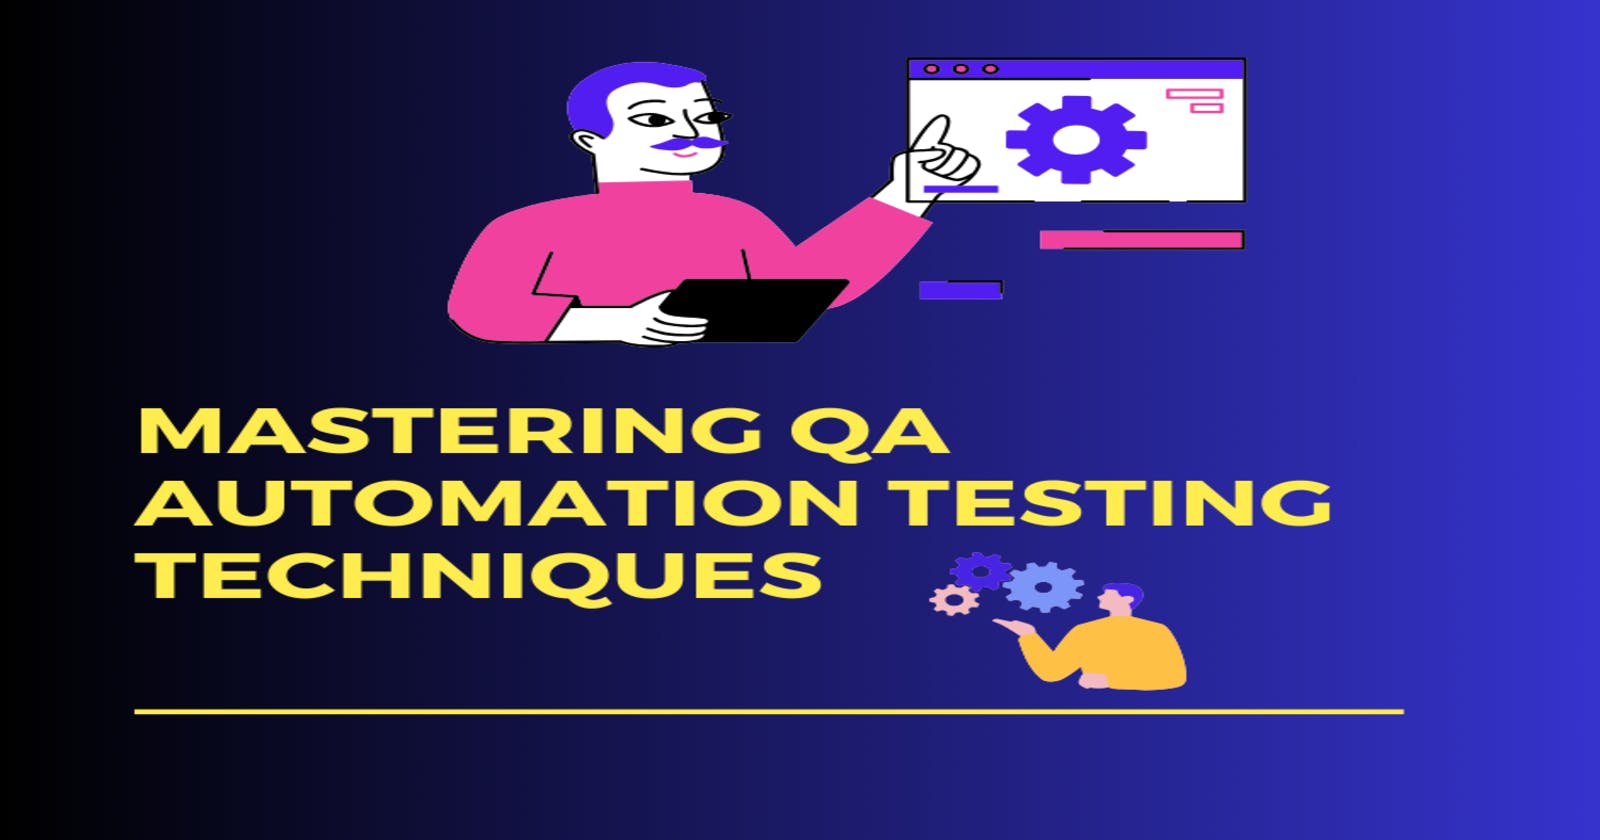 Mastering QA Automation Testing Techniques